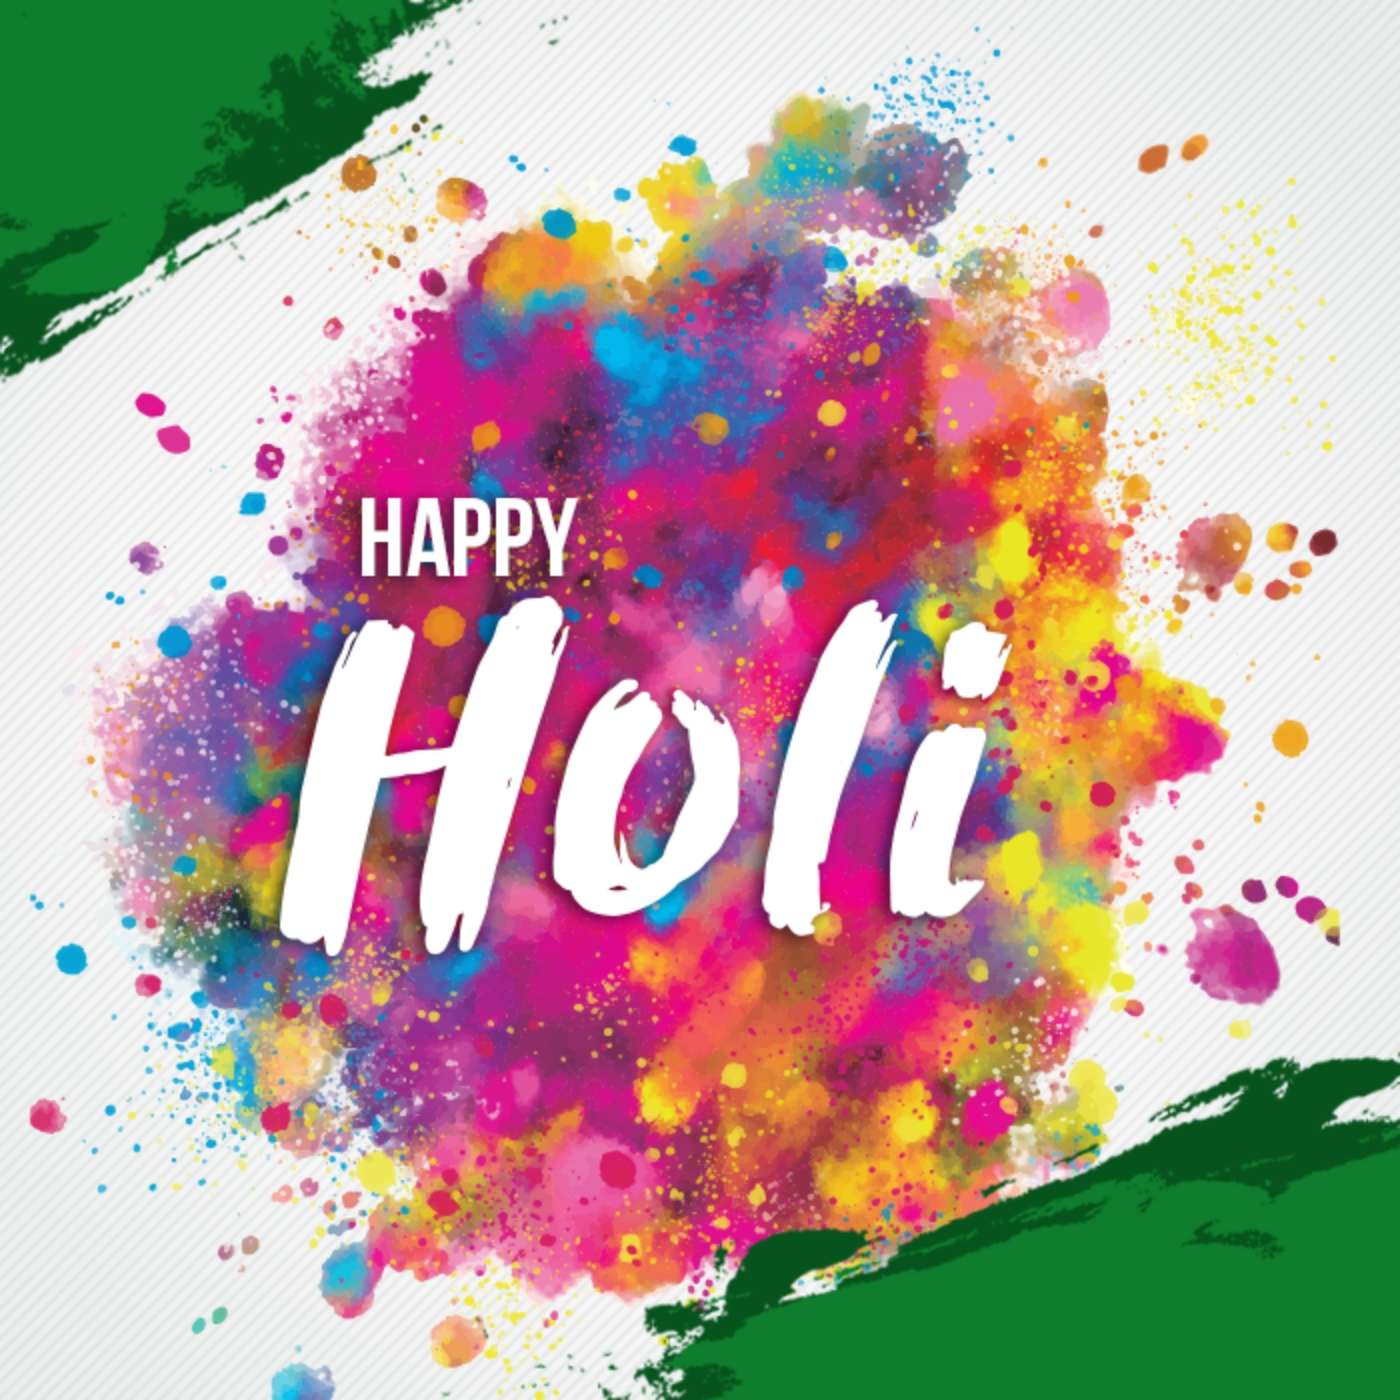 Happy Holi Images Hd Download